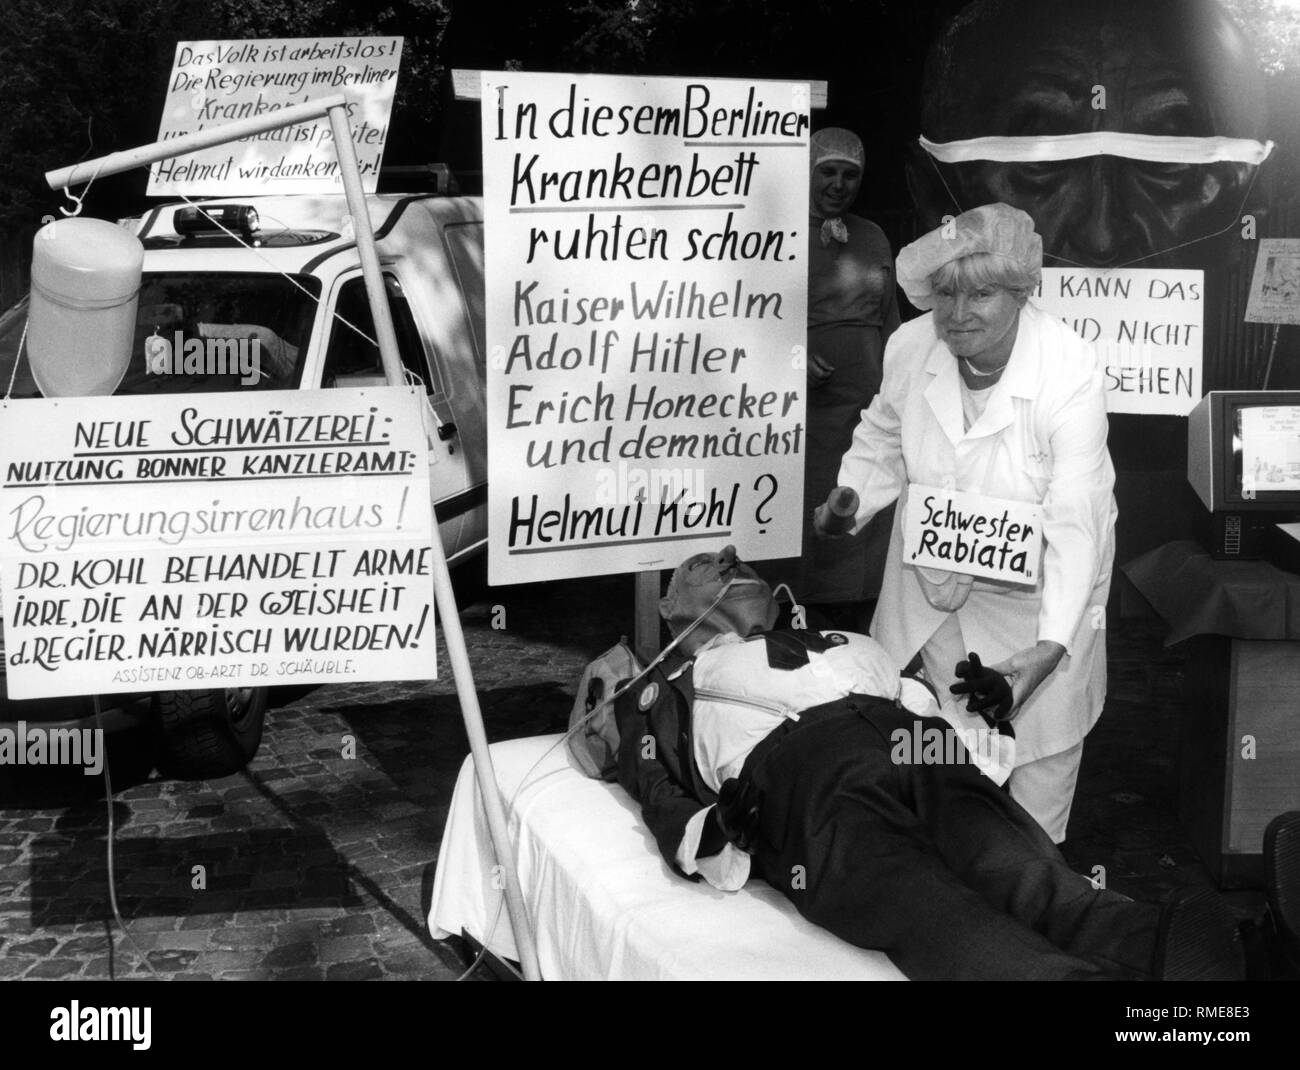 This photograph shows a demonstration against the moving of the government from Bonn to Berlin. Members of the Bonner-Buerger-Bund disguised themselves as doctors and nurses. This photograph shows a woman disguised as a nurse, 'Sister Rabiata,' who is treating a cabbage doll. On the protest posters are slogans such as 'New gossip: Use of the Bonn Chancellery: Government madhouse! Dr. Kohl treats poor lunatics, who were at the wisdom d. Government foolish! Assistant doctor Dr. Schaeuble.', 'The people are unemployed! The government is in the Berlin hospital and the state is broke! Stock Photo